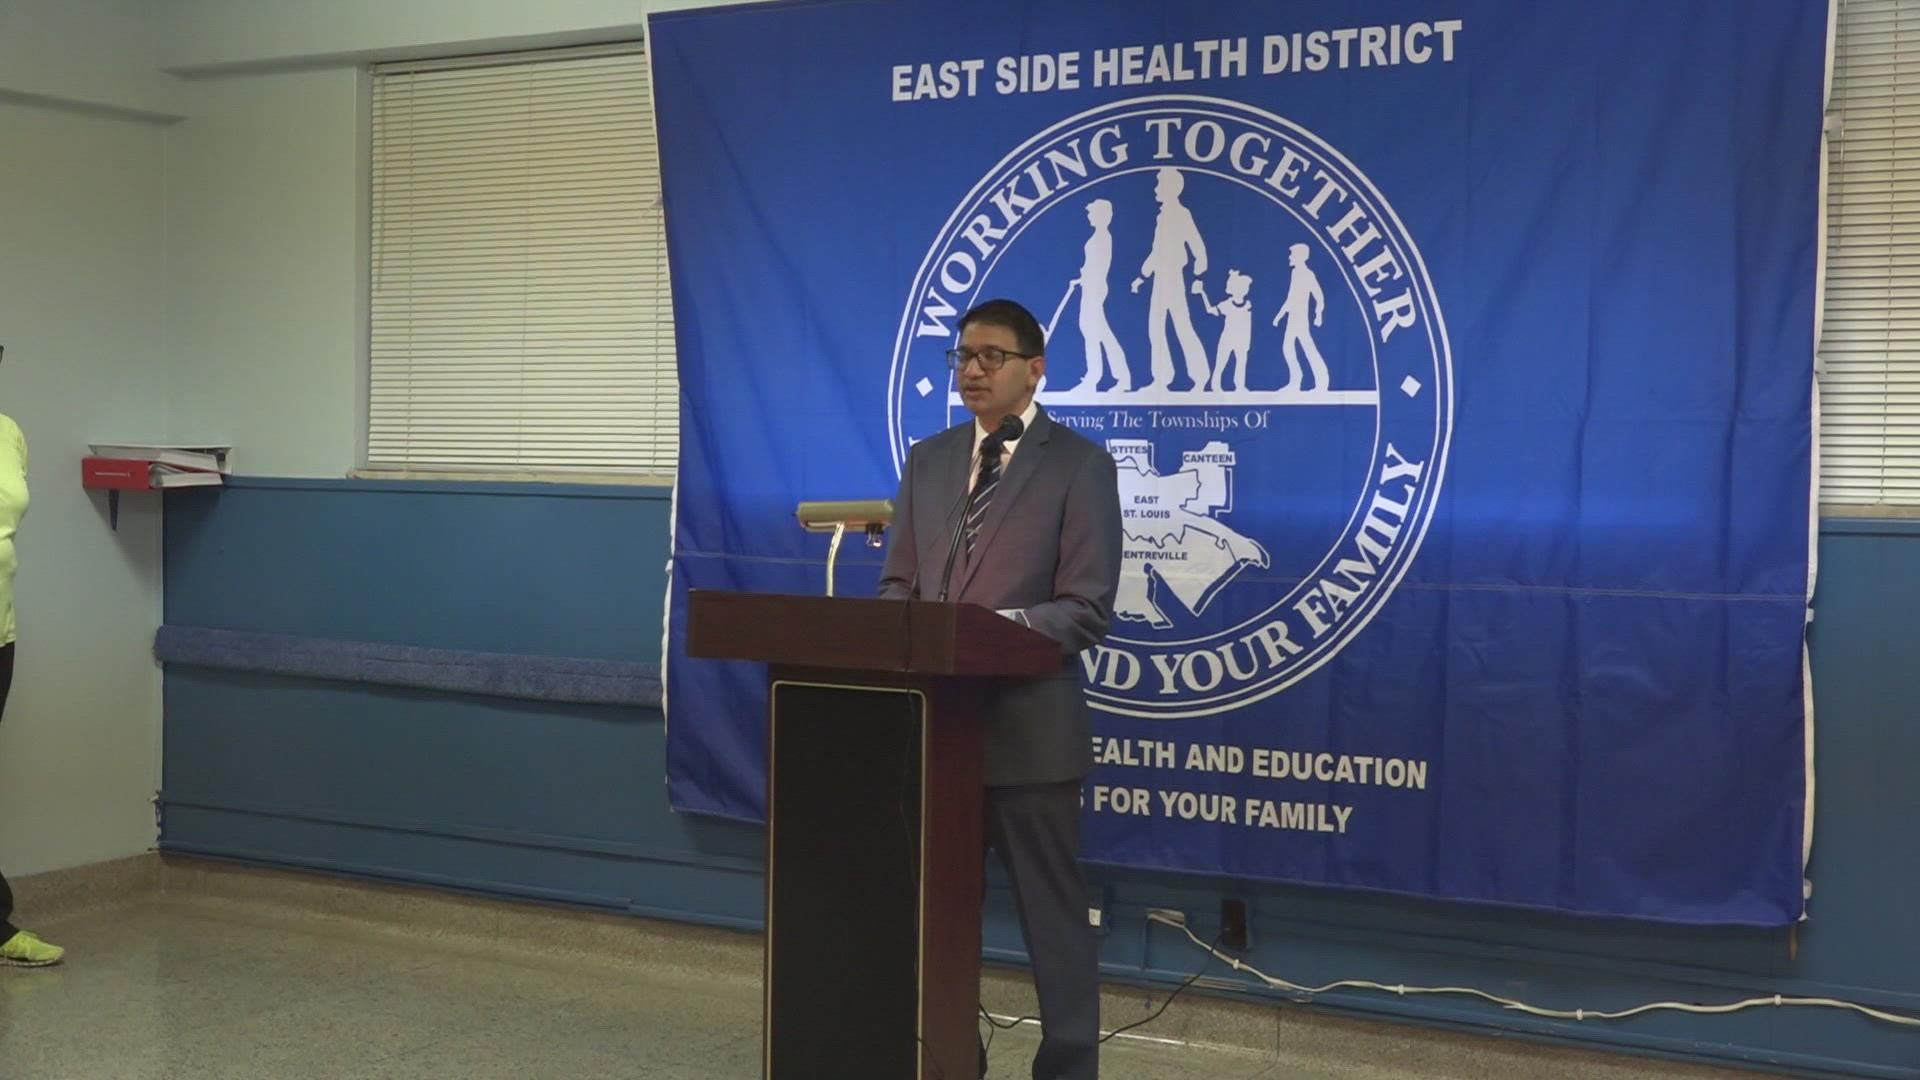 Dr. Sameer Vohra became the director of Illinois' Department of Public Health in August. He paid his first visit to the East Side Health District in East St. Louis.